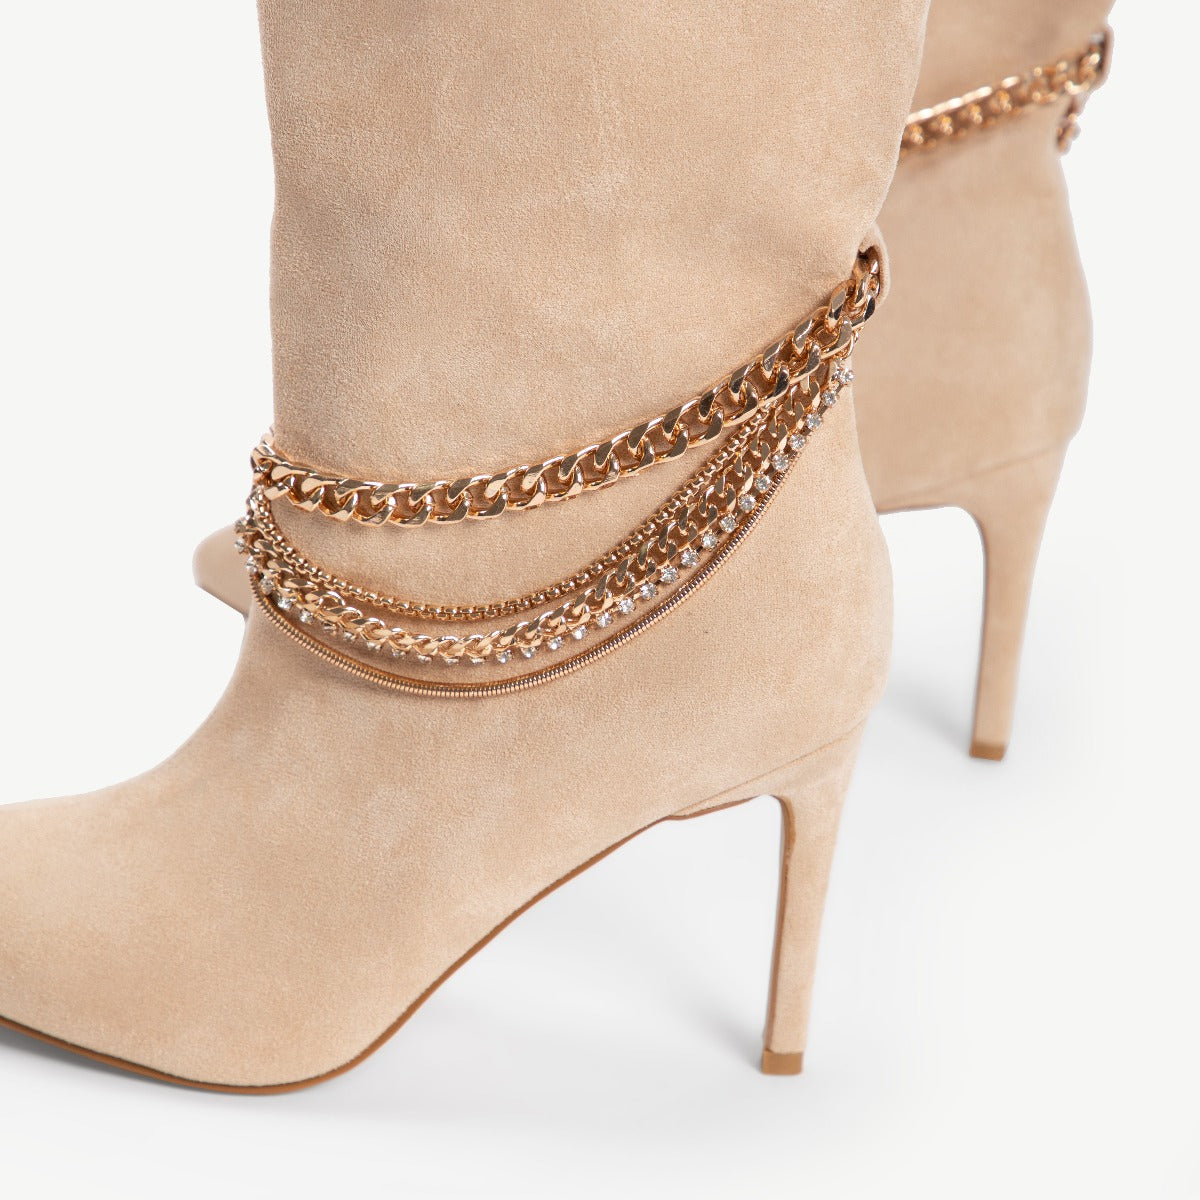 RAID Trixabel Chained Boot in Nude